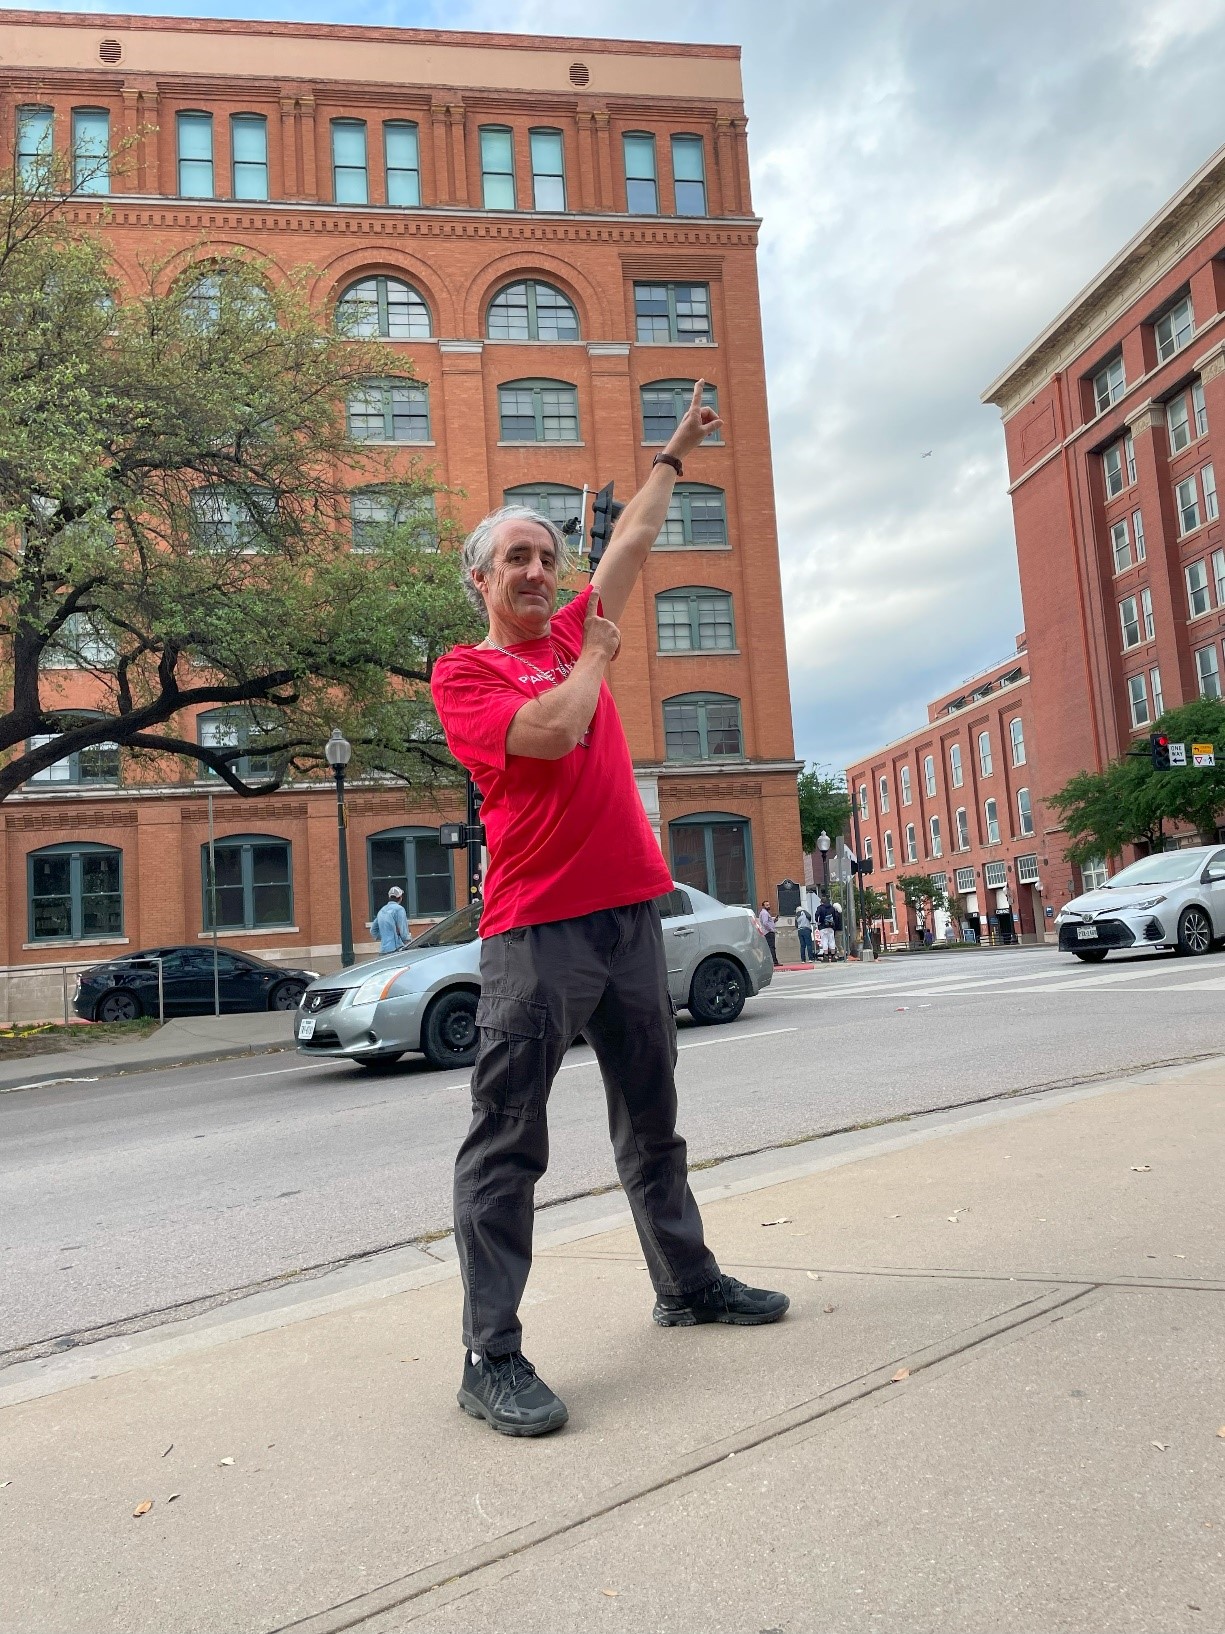 This is the former book depository building from where Lee Harvey Oswald assassinated John F Kennedy.